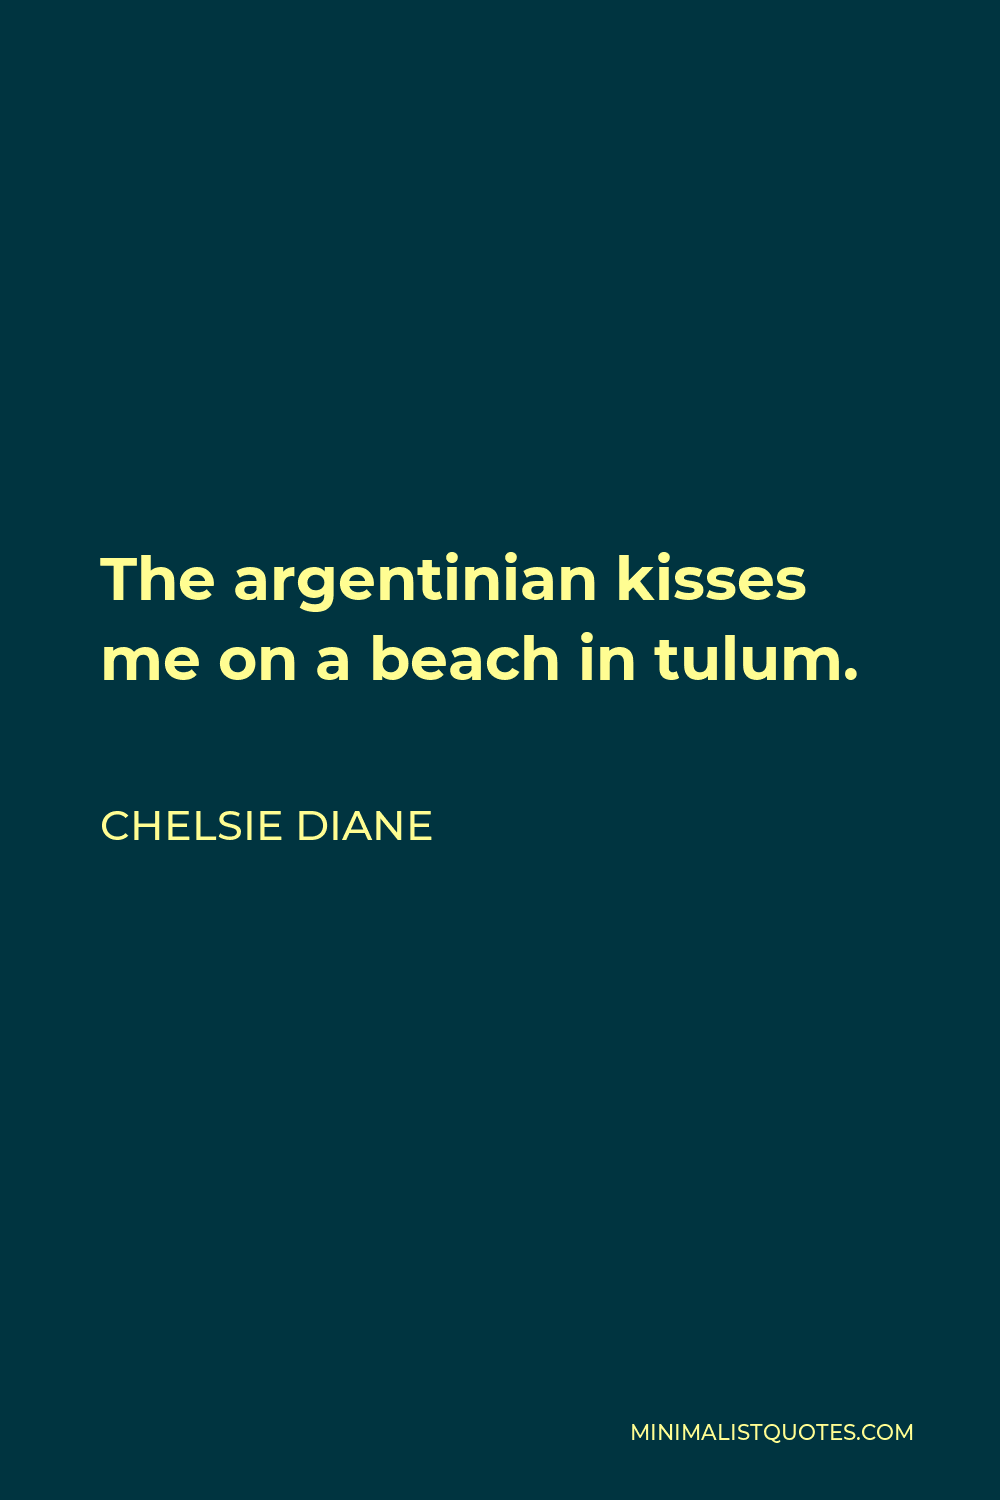 Chelsie Diane Quote - The argentinian kisses me on a beach in tulum.